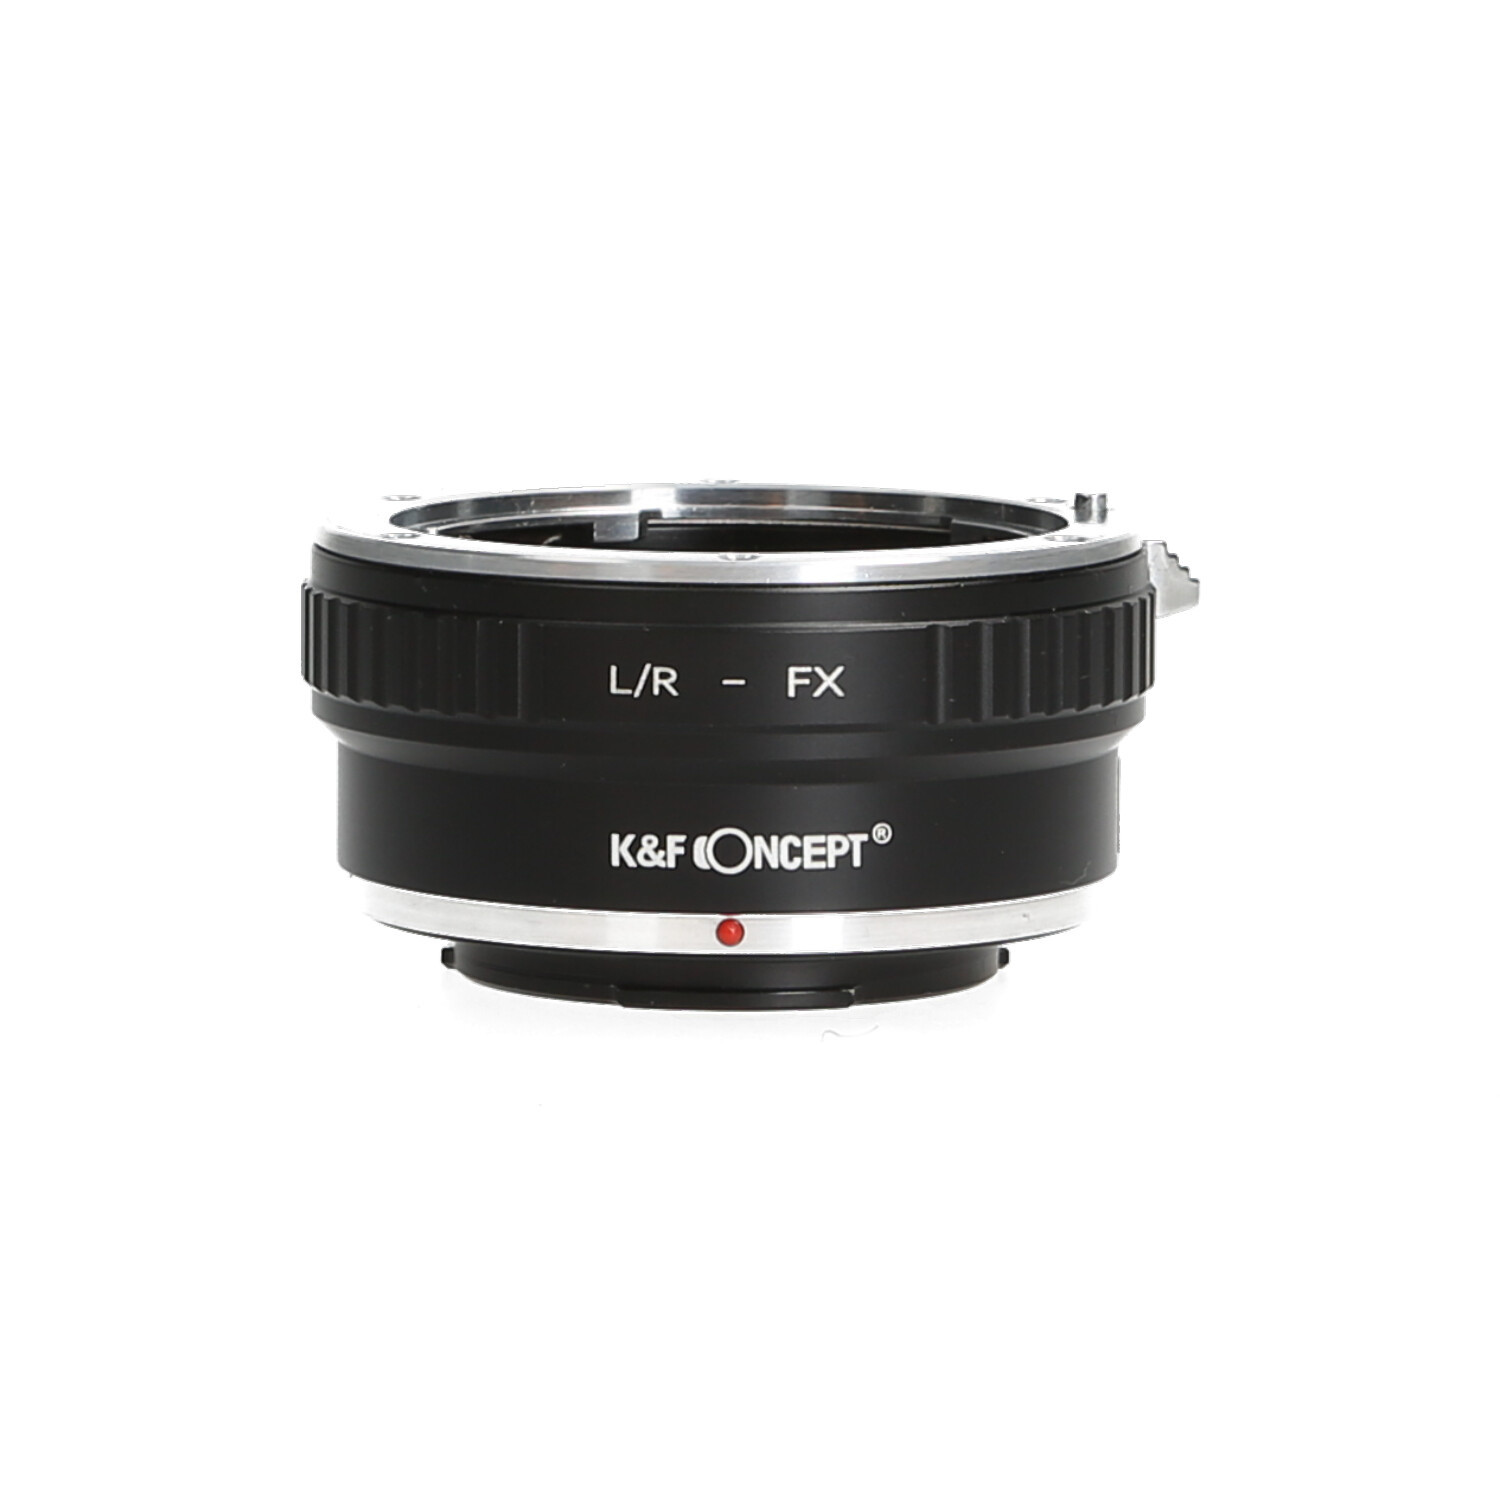 K&F Concept K&F Concept adapter for Leica R mount lens to Fujifilm X